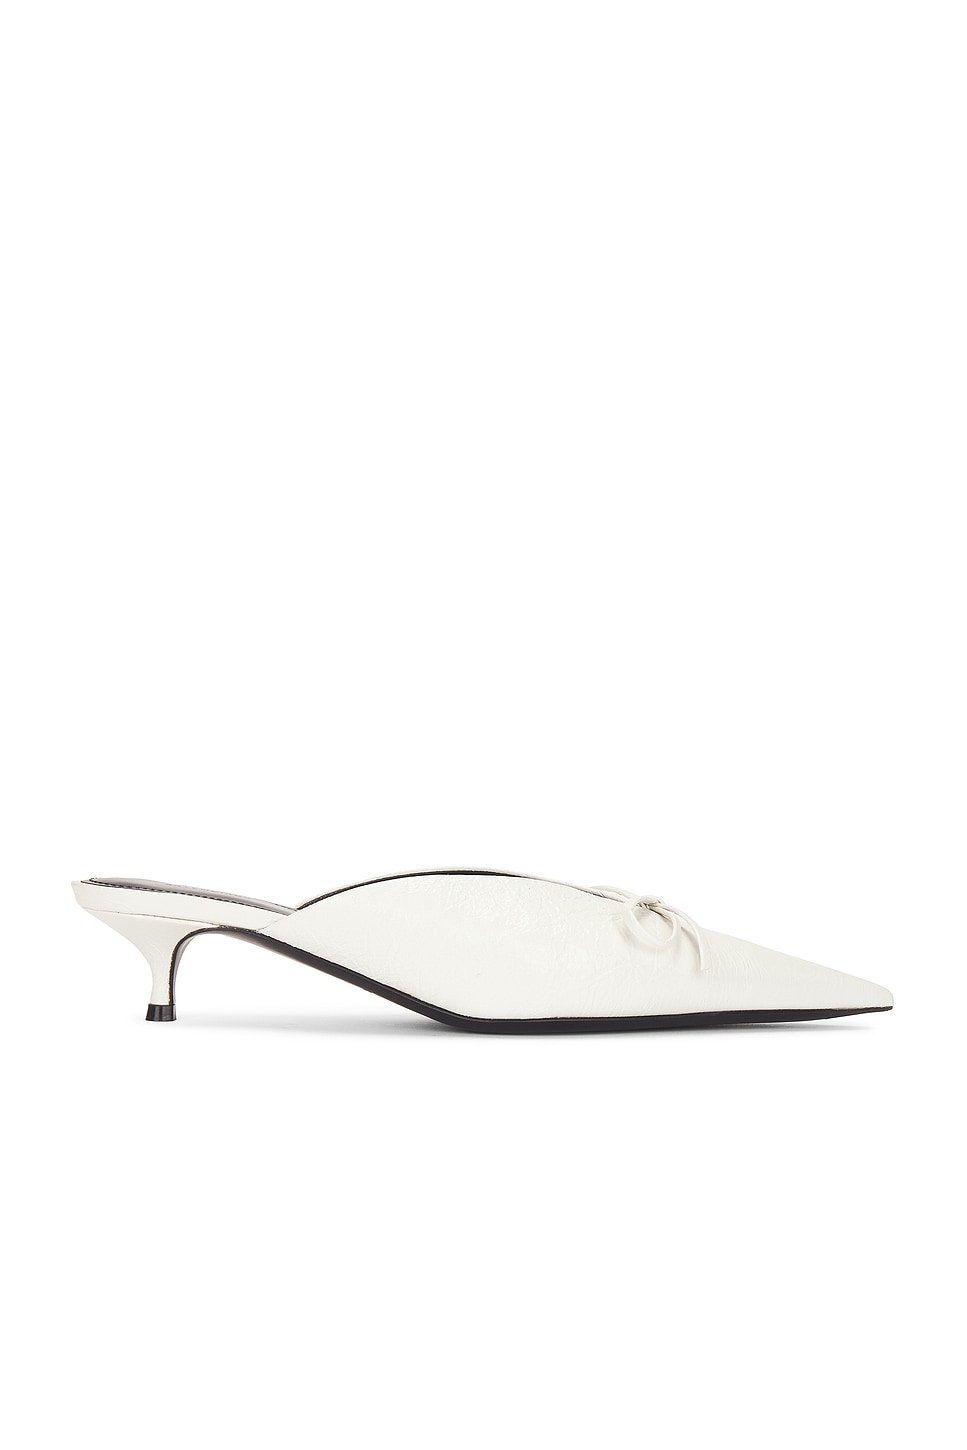 Image 1 of Balenciaga L40 Knife Bow Mule Heel in White